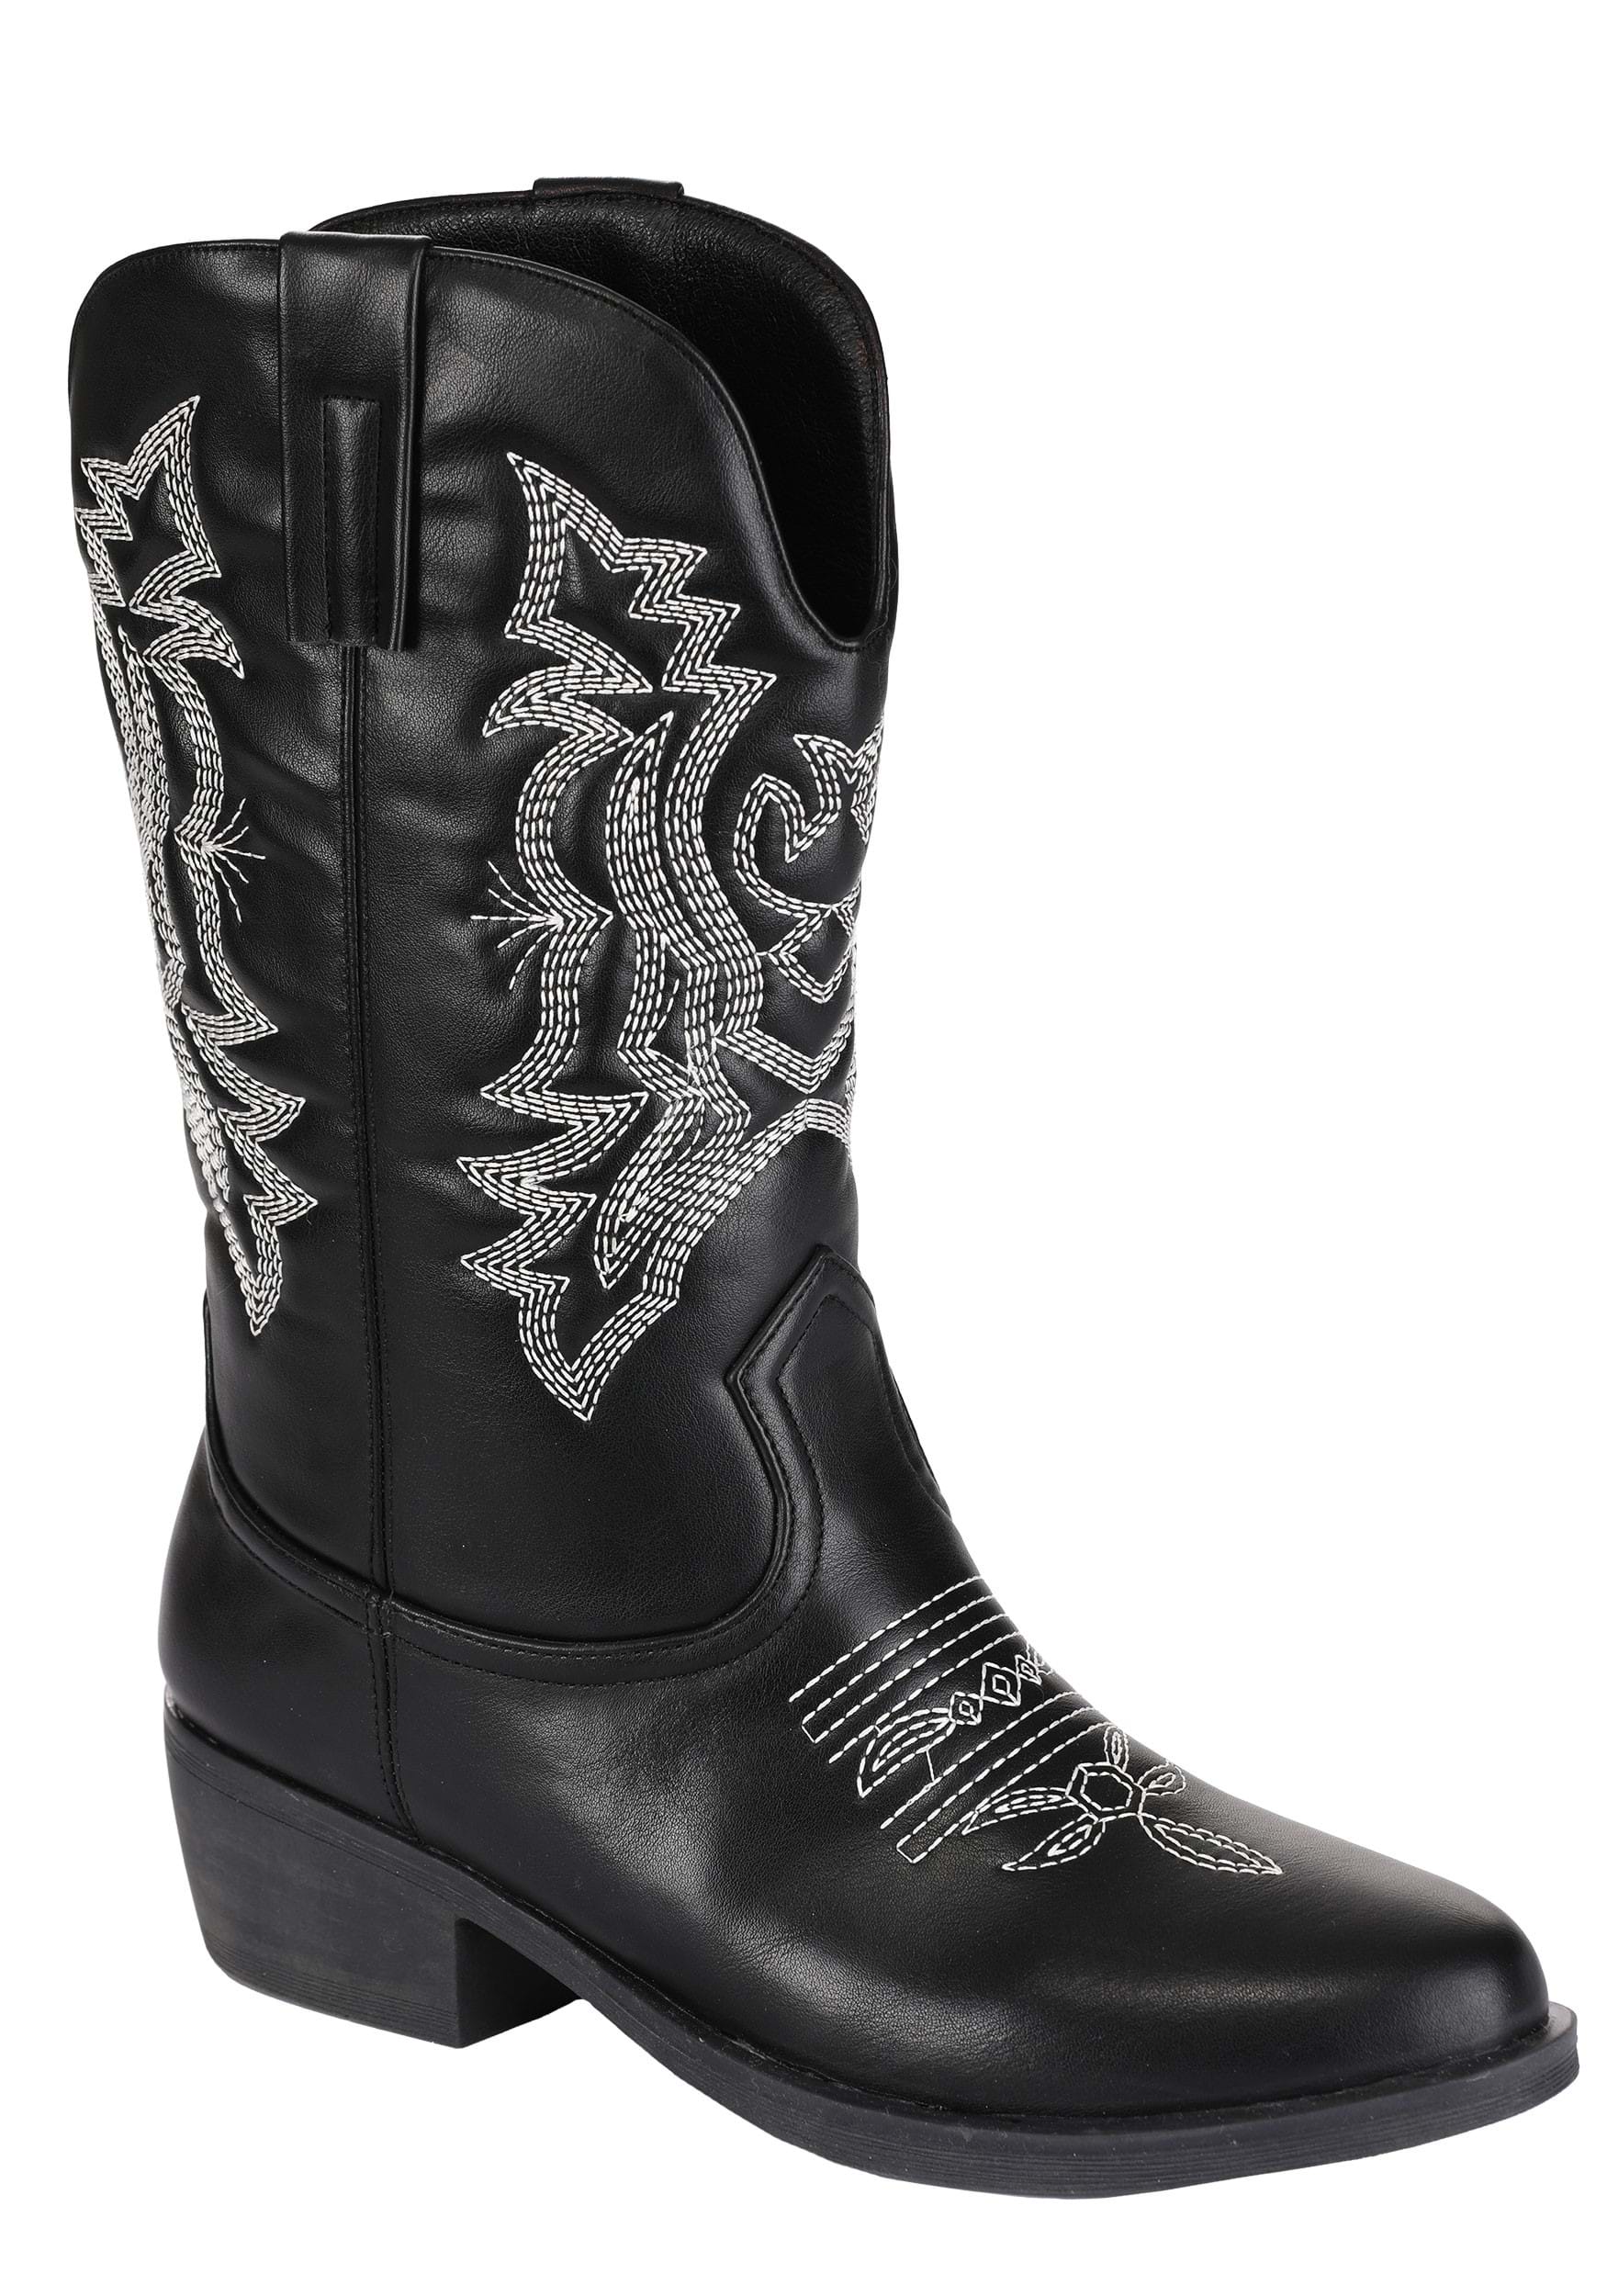 Women's Classic Black Cowgirl Boots